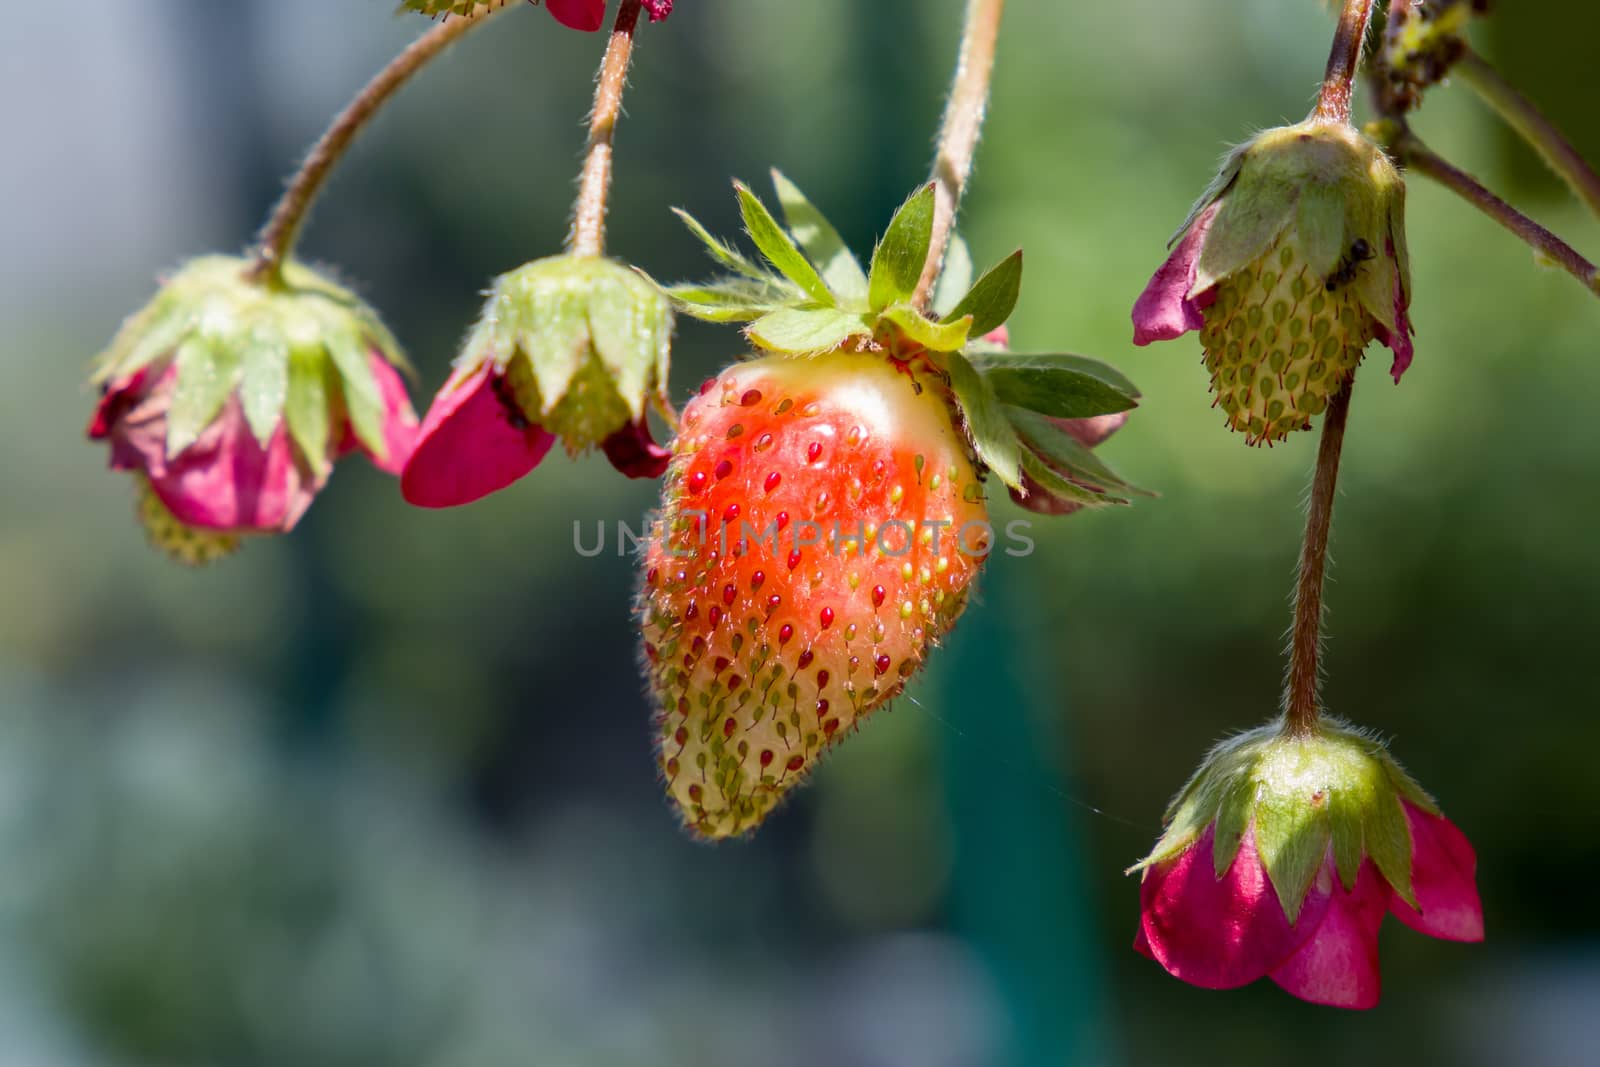 Strawberries forming and ripening in sun.